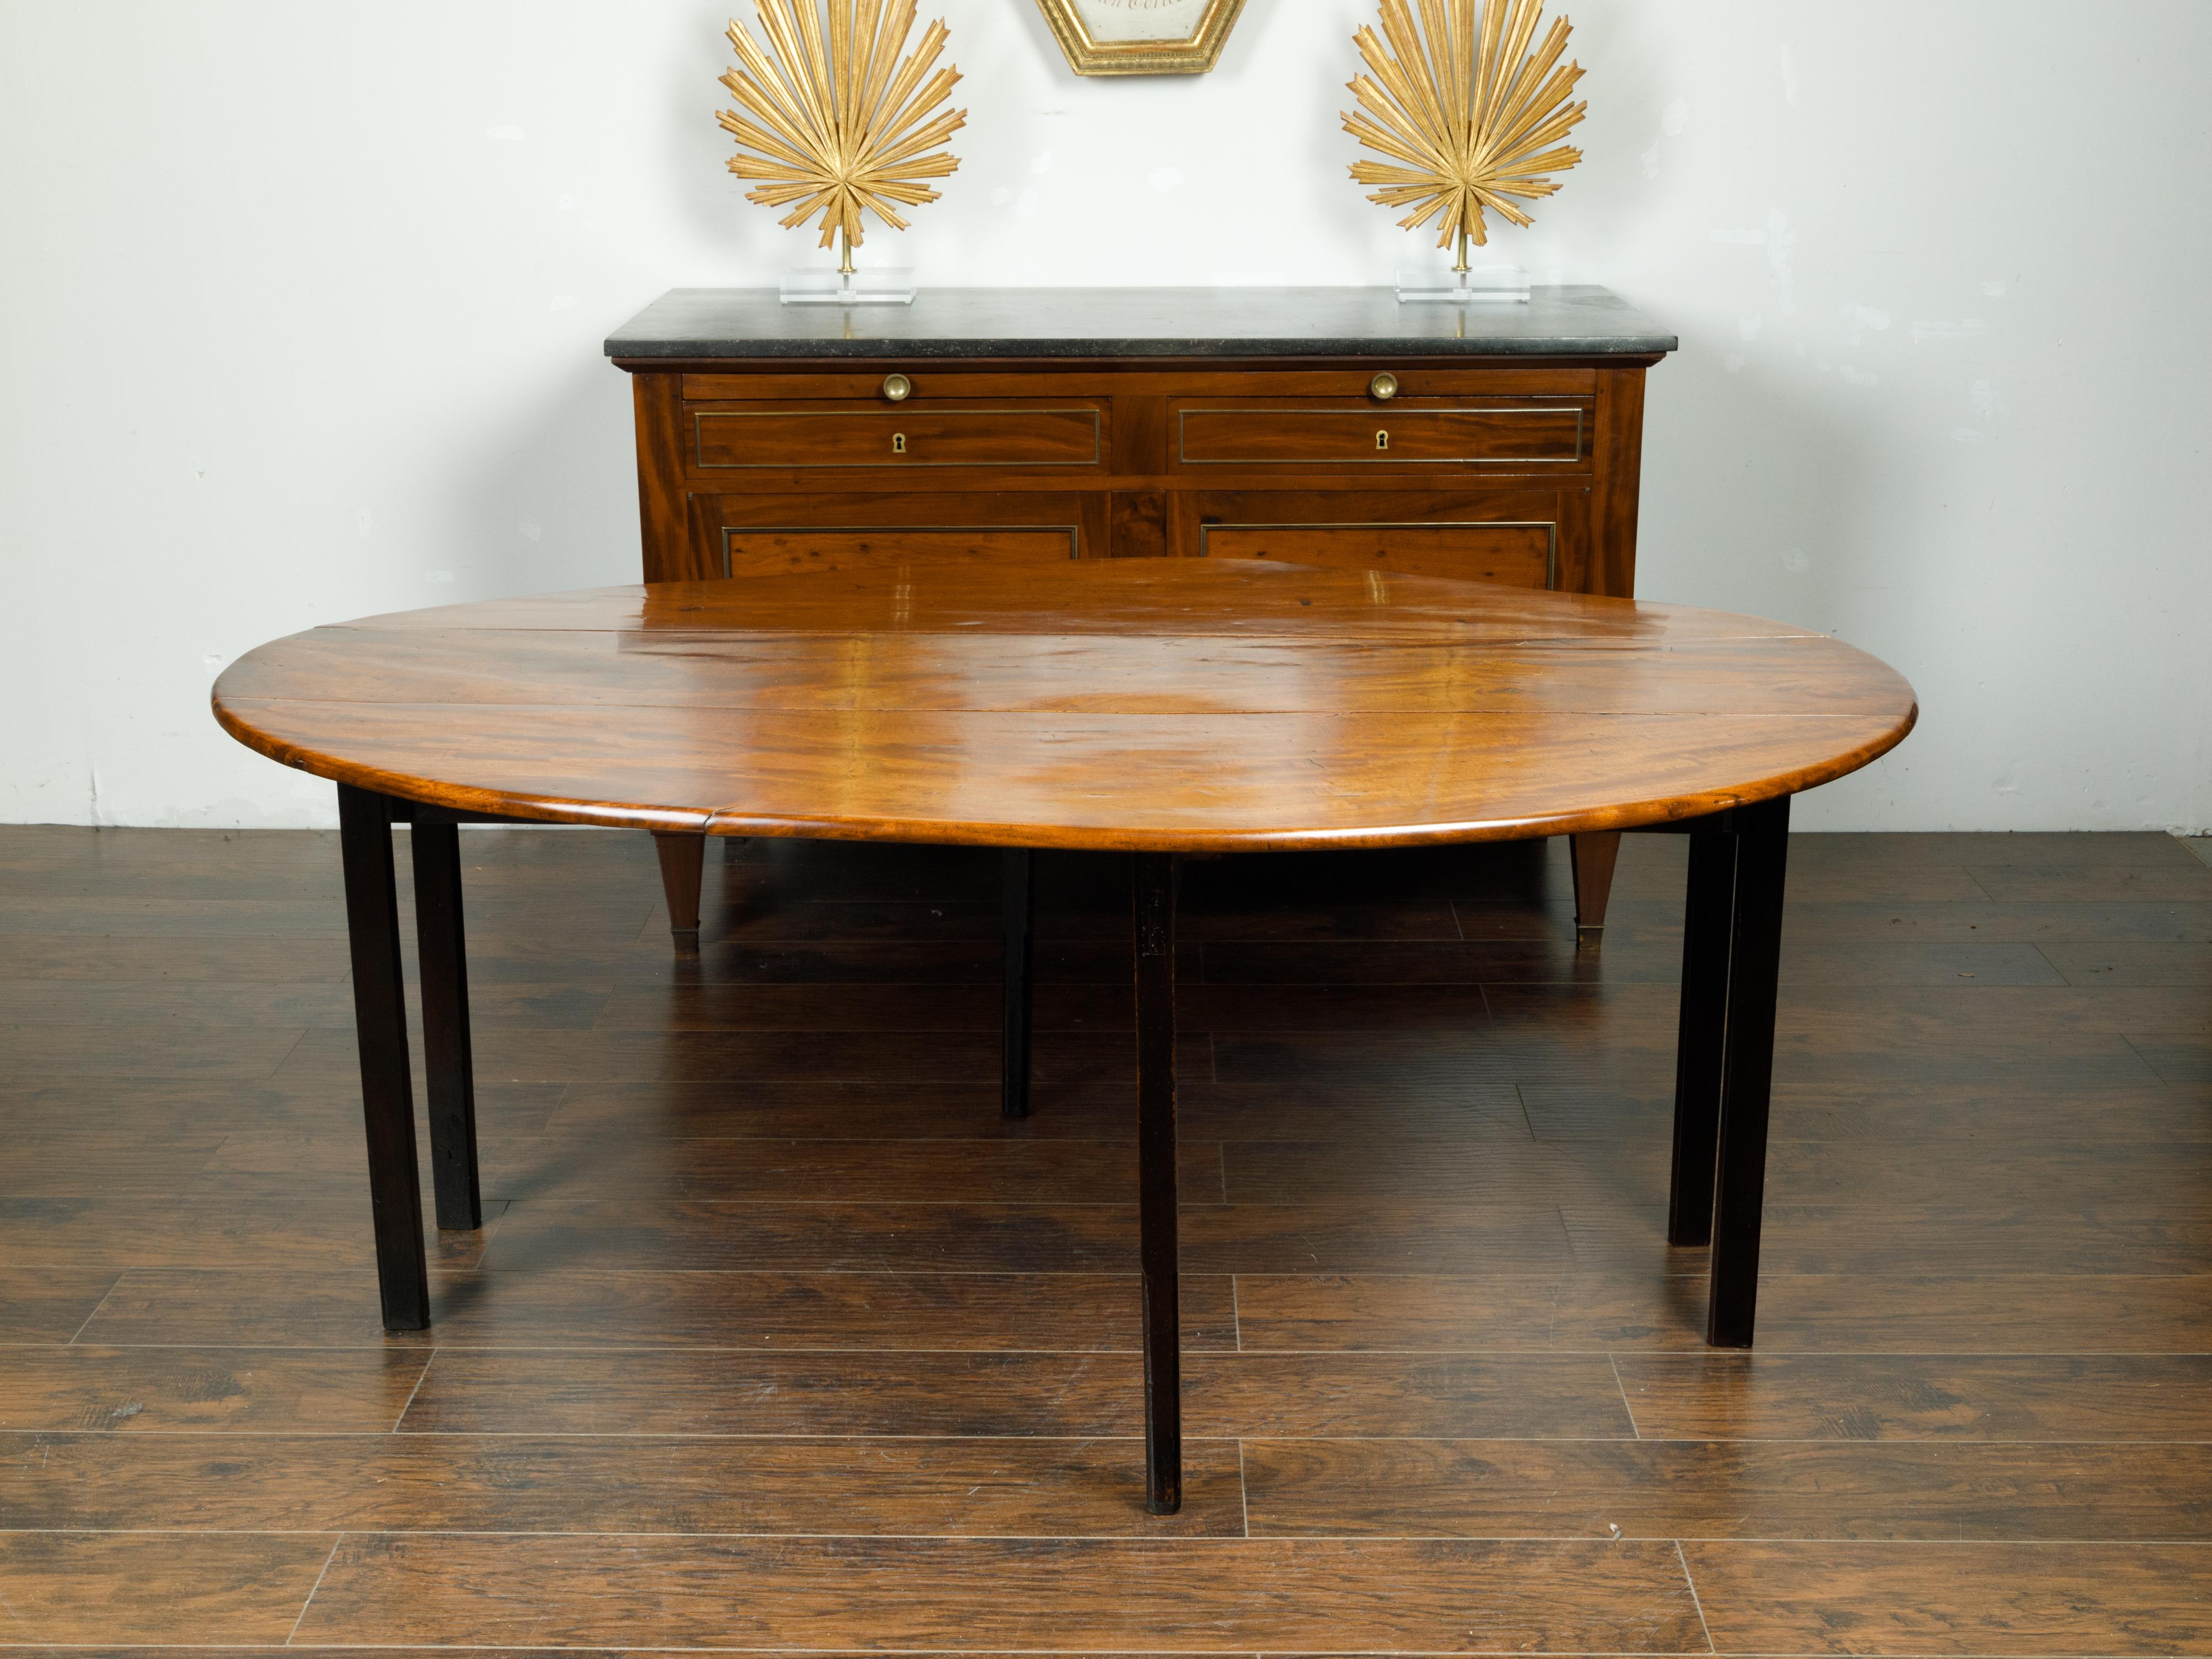 An English mahogany drop leaf dining table from the early 20th century, with oval top and ebonized legs. Created in England during the first quarter of the 19th century, this table features a mahogany veneered oval top with two drop leaves measuring